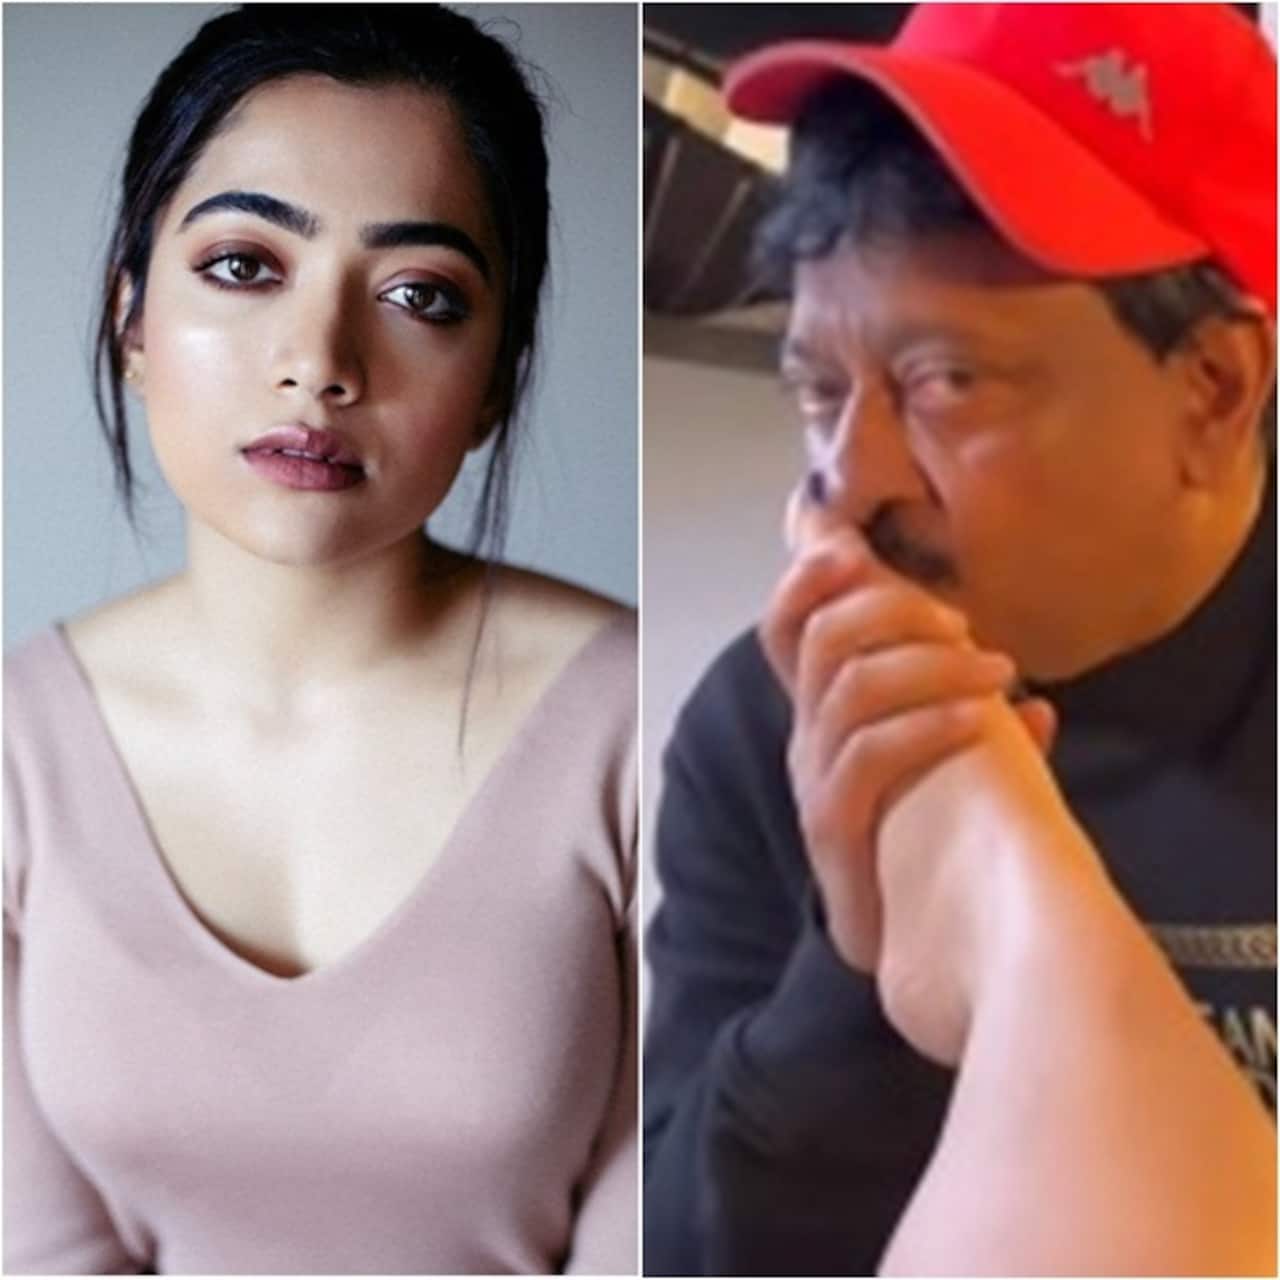 Trending south news today: Rashmika Mandanna reacts to facing ban from Kannada film industry; RGV licks and kisses Ashu Reddy's feet and more